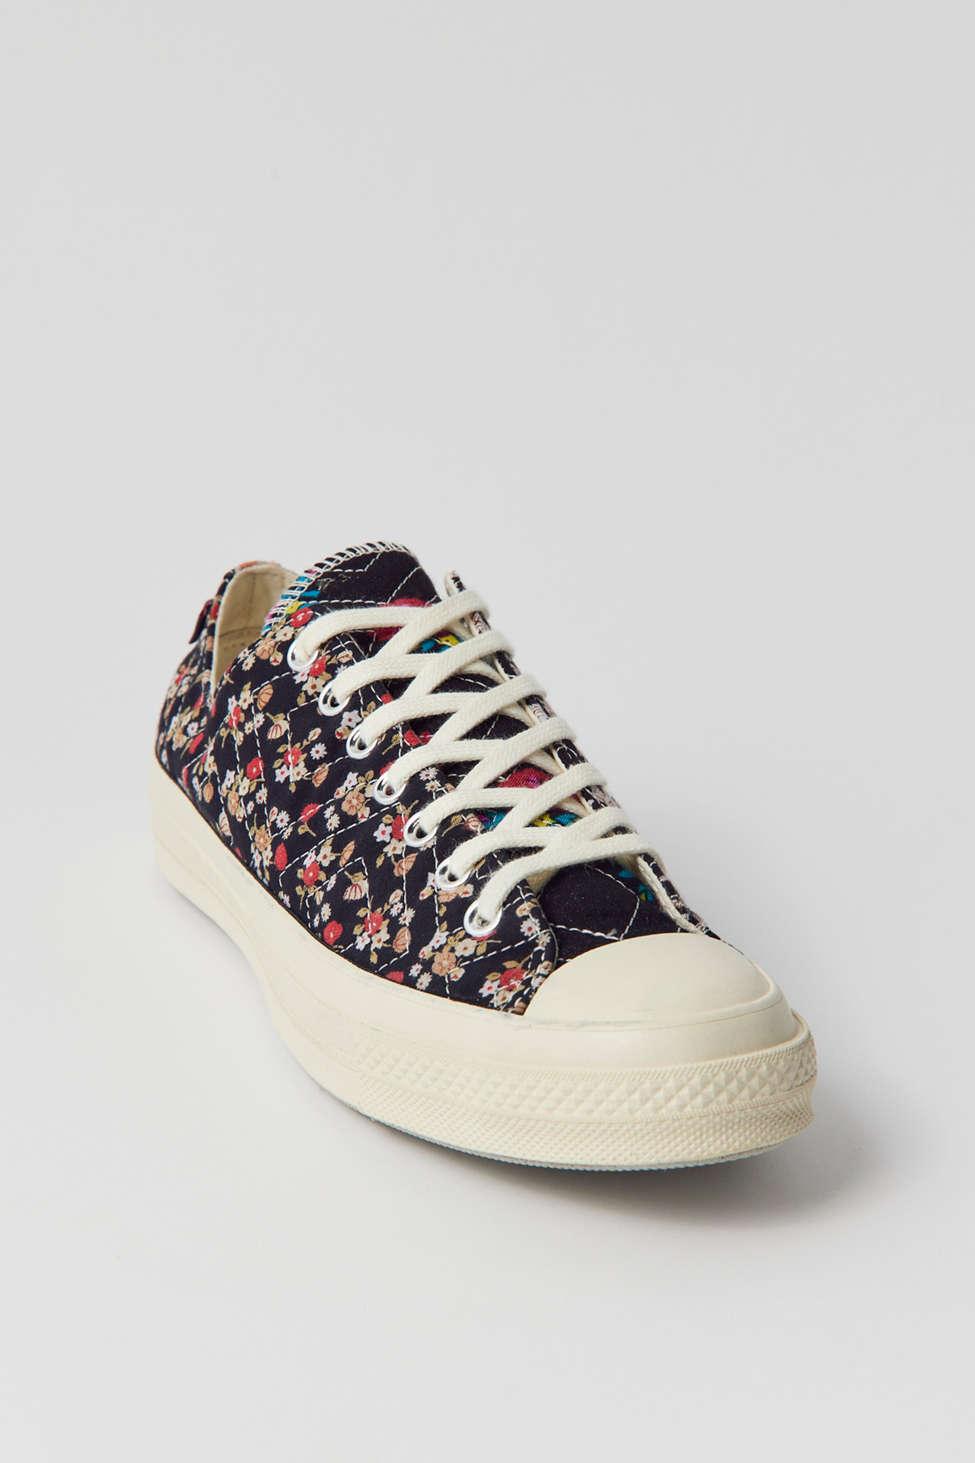 Converse Ct70 Ox Beyond Retro Low Top Sneaker In Assorted,at Urban